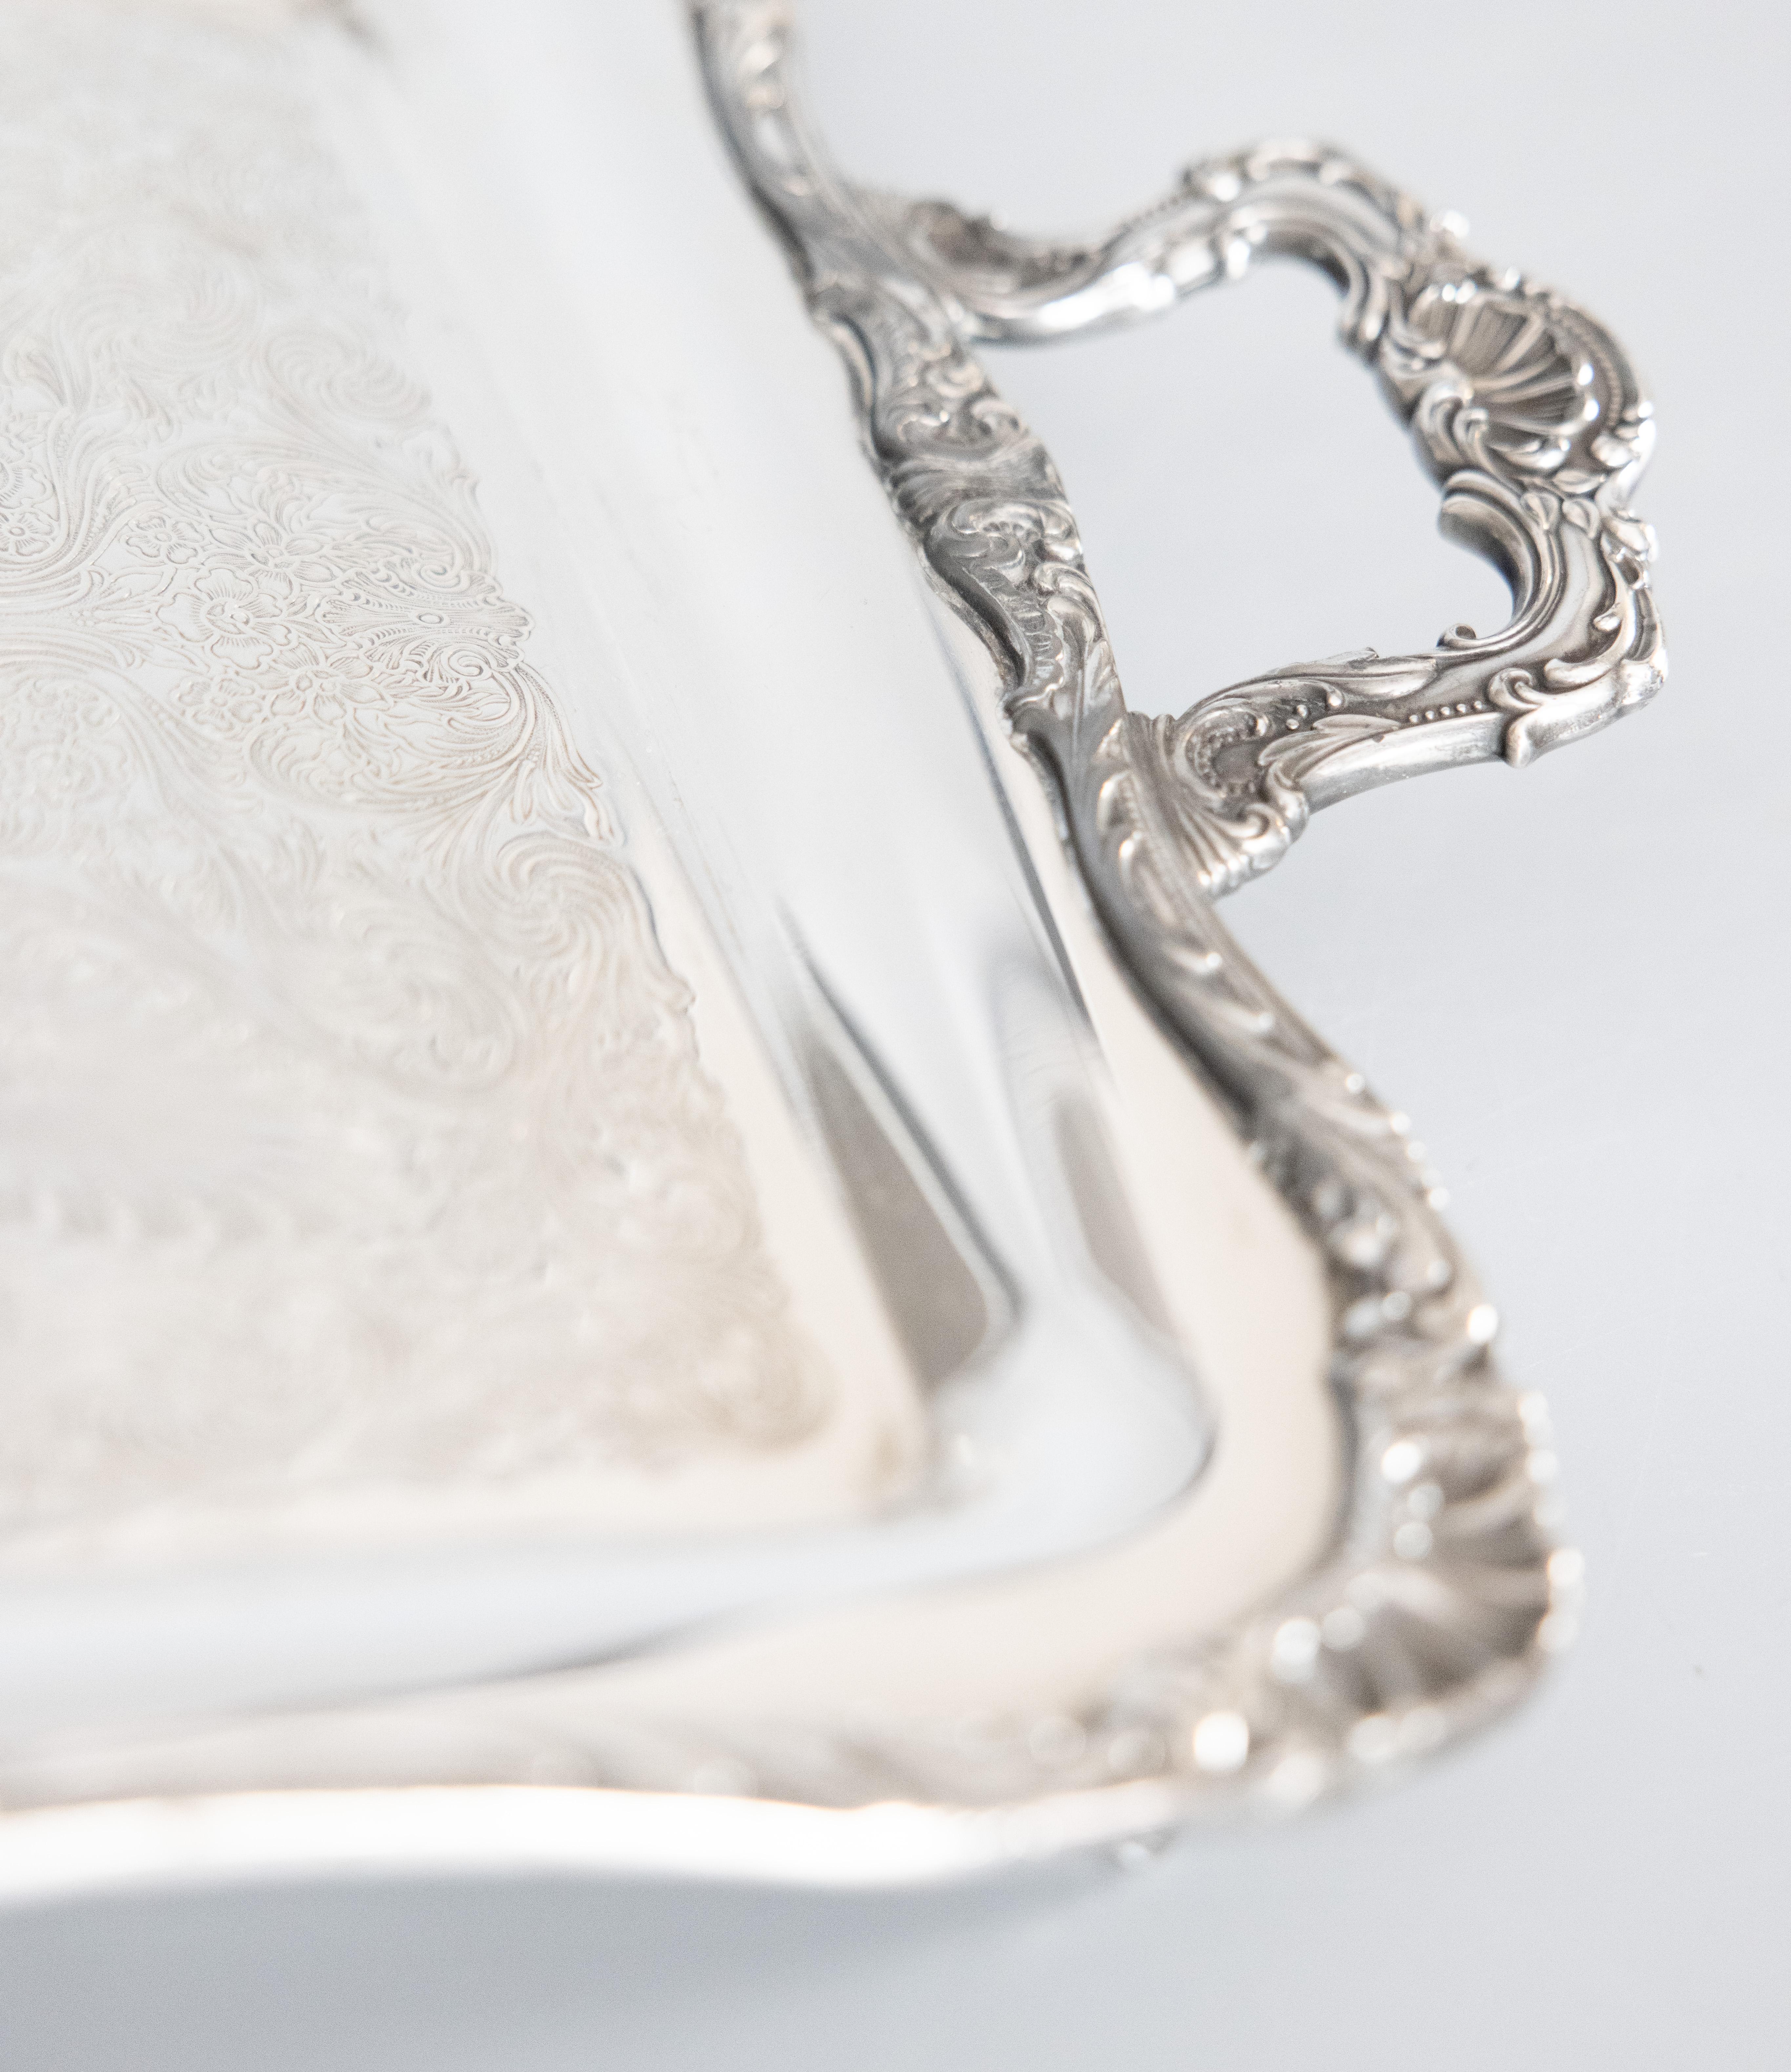 Wm Rogers Silver Plate Footed Rectangular Serving Tray With Handles, circa 1950 For Sale 2